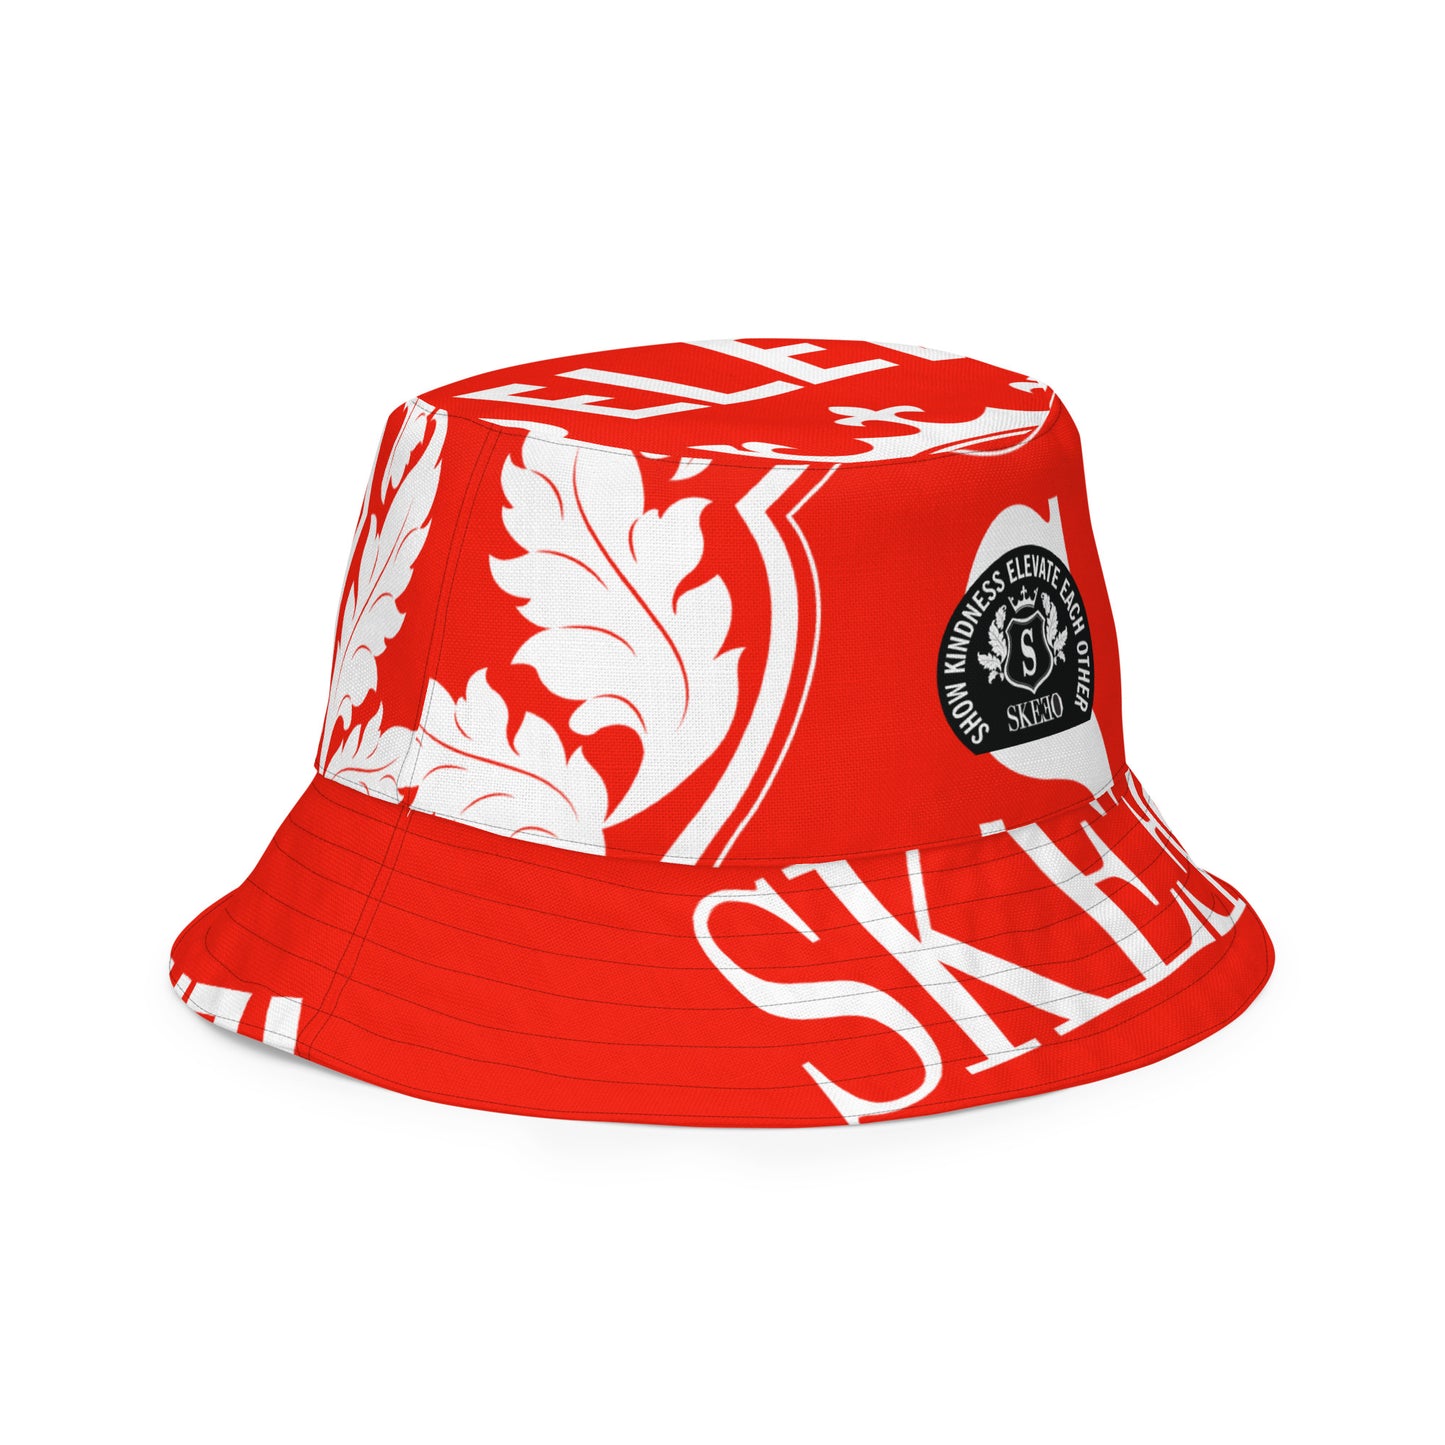 1 ASK White/Red Reversible bucket hat